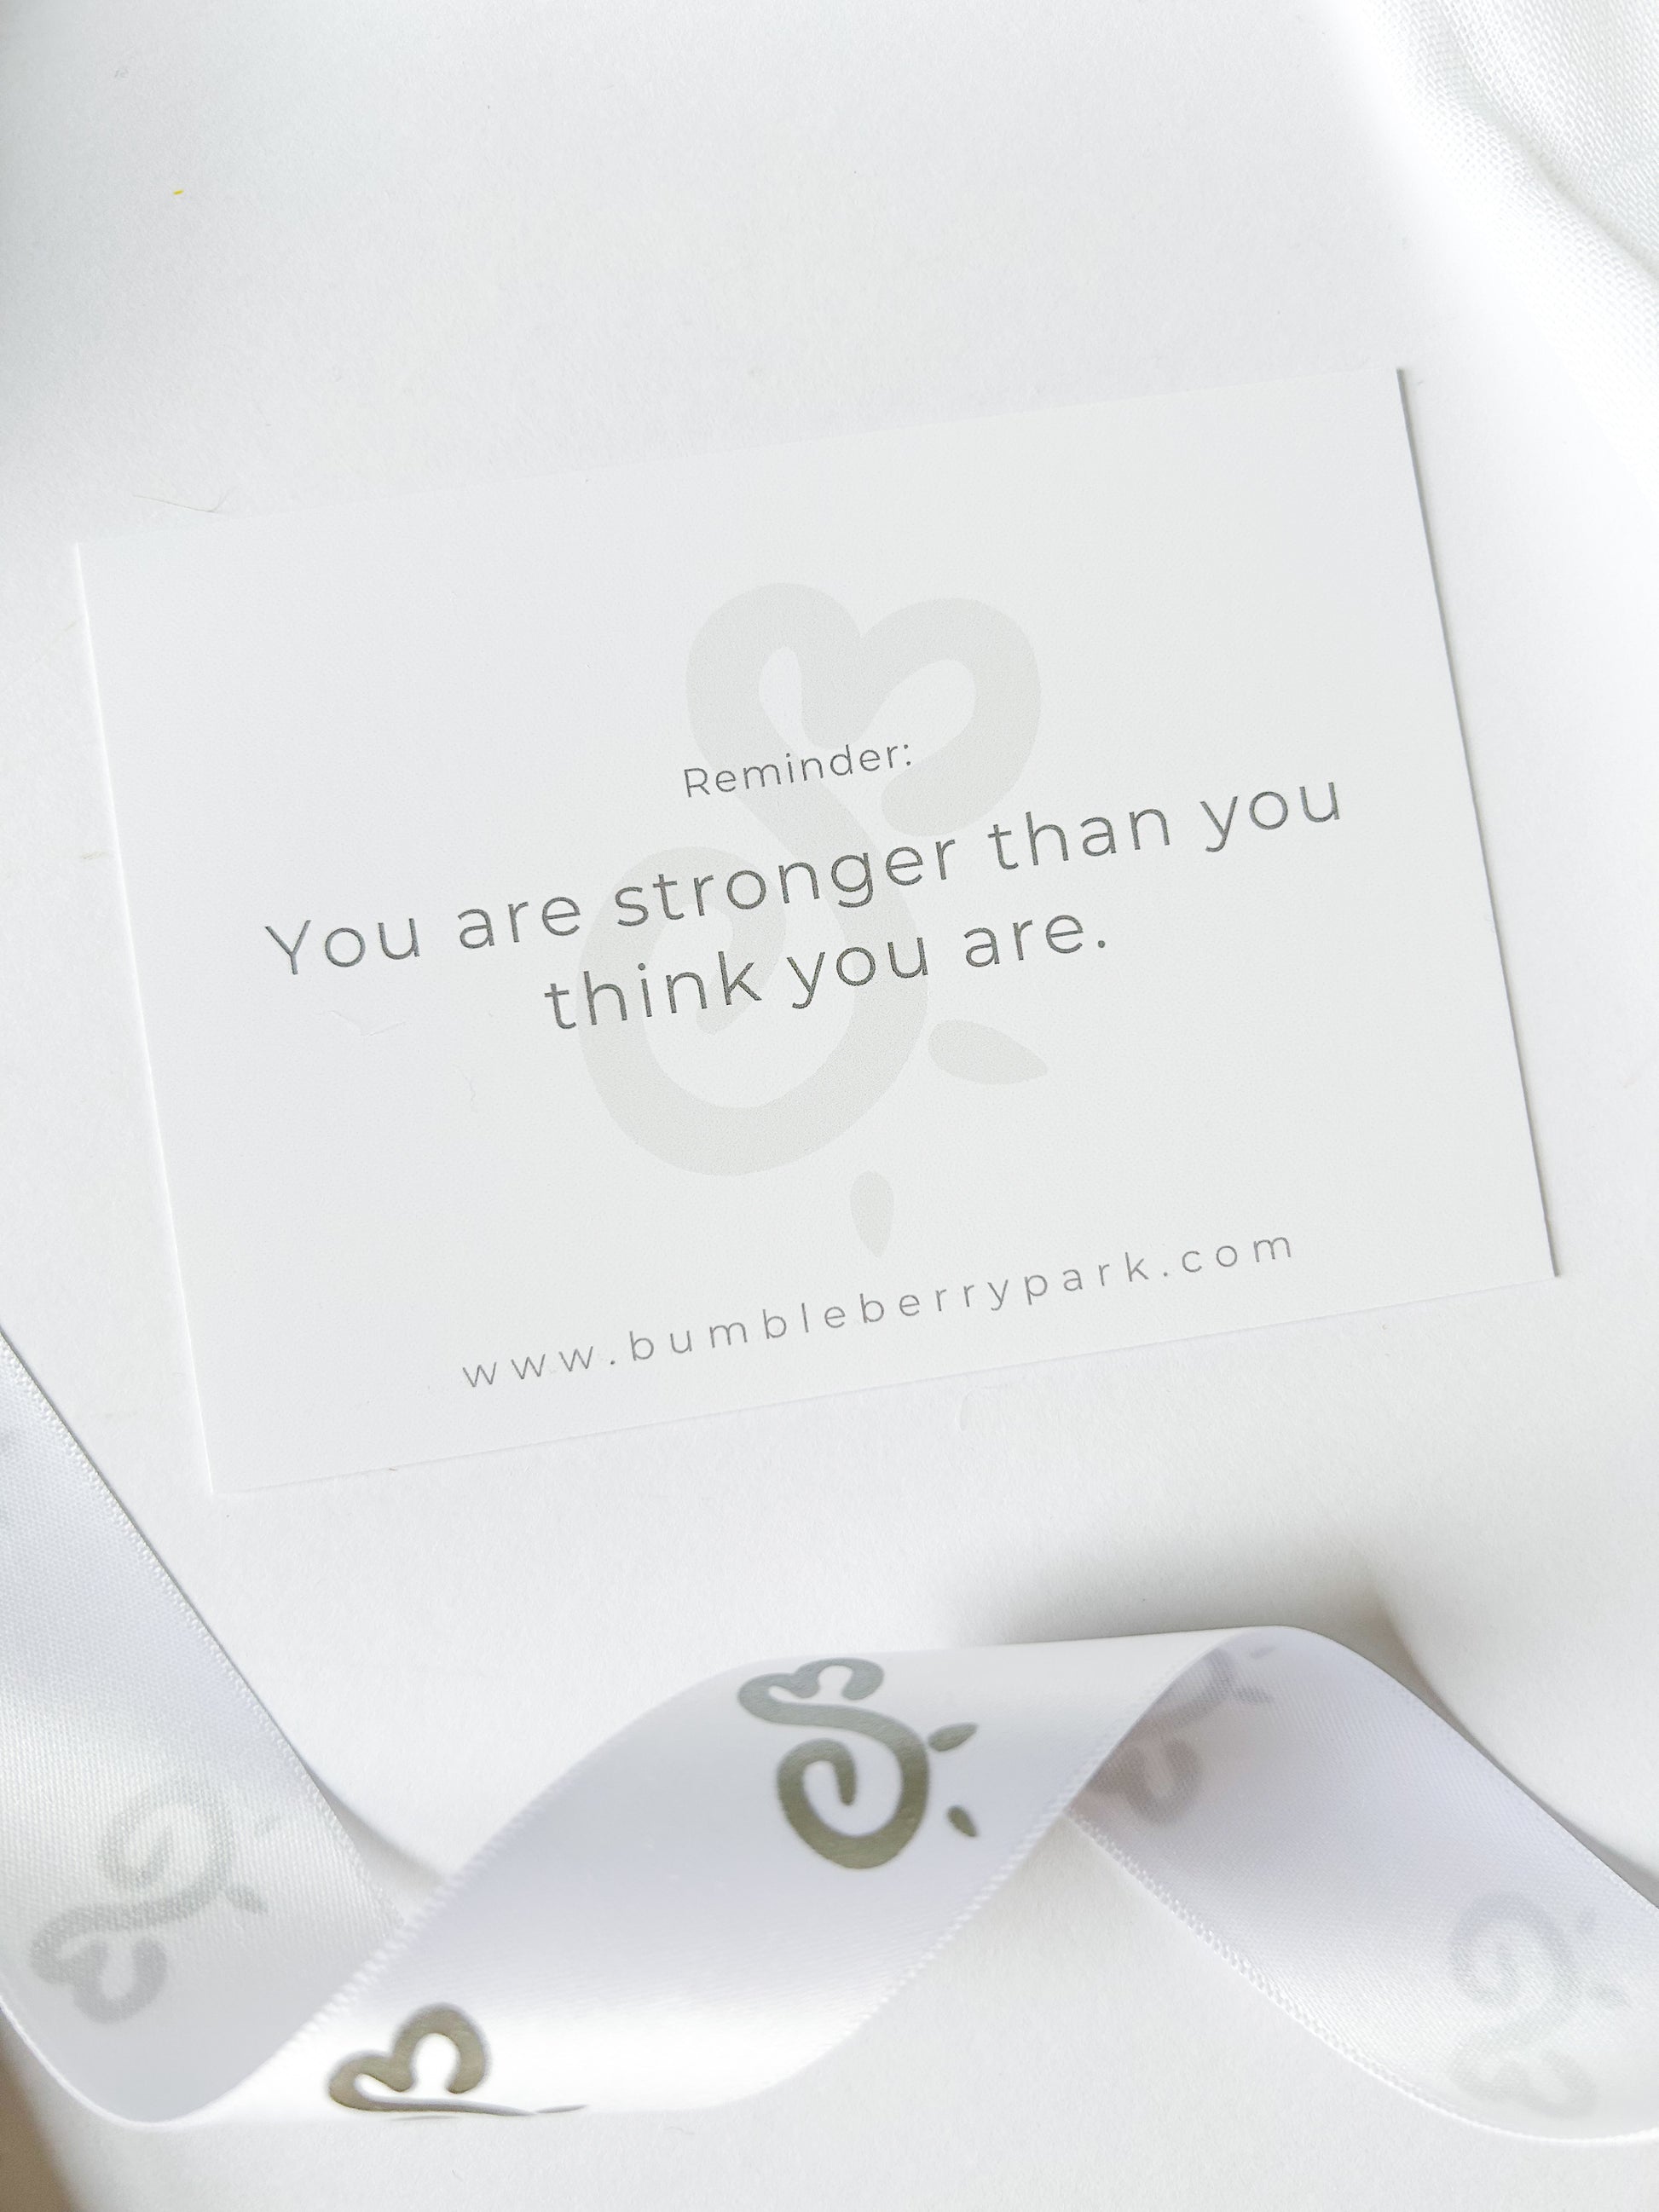 mindset card set for new mum gift with quote "you are stronger than you think you are"